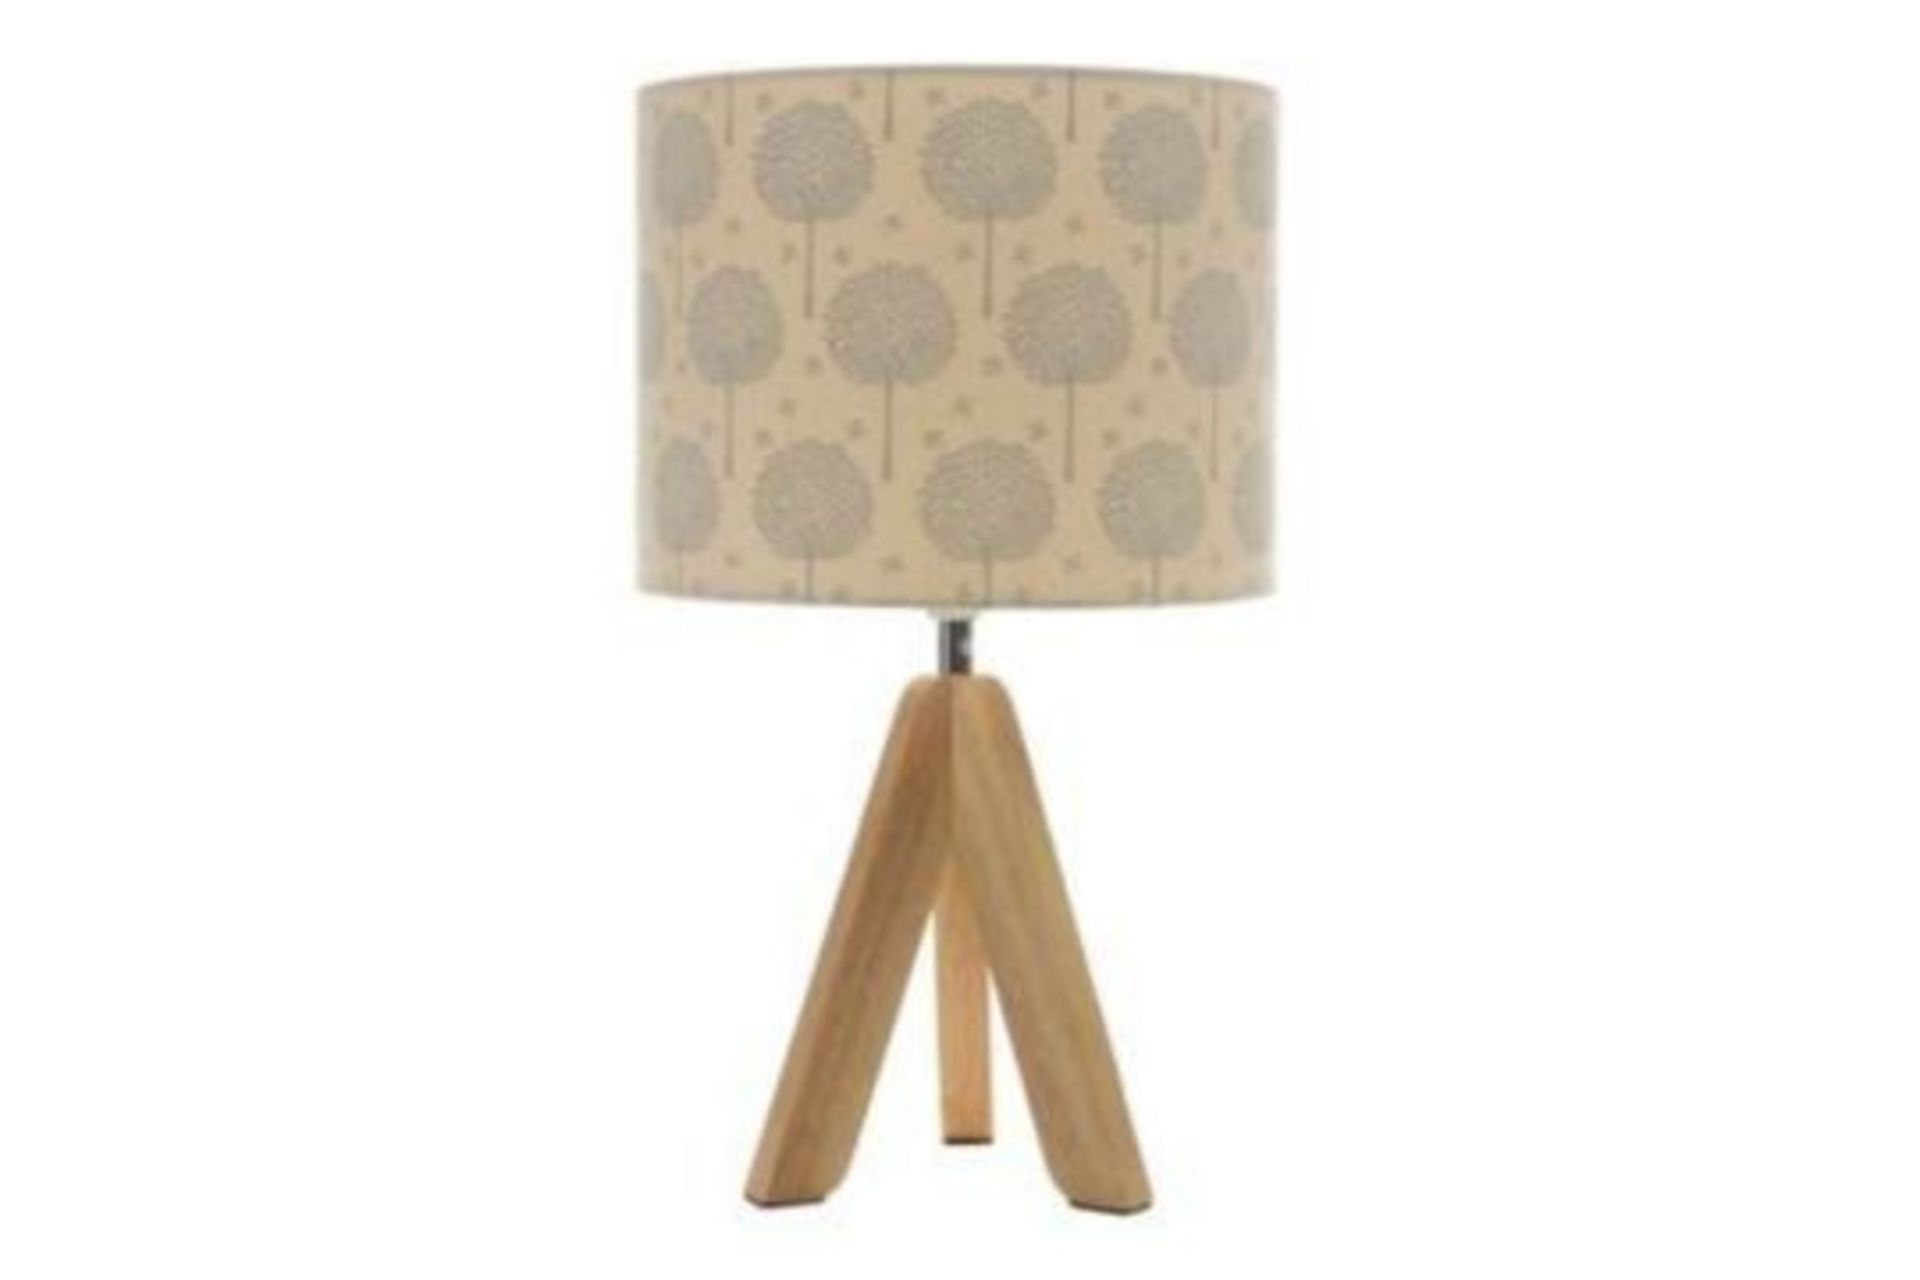 NEW HOUSE OF FRASER WOODEN TRIPOD WOODEN LAMP AND SHADE - RRP £60.